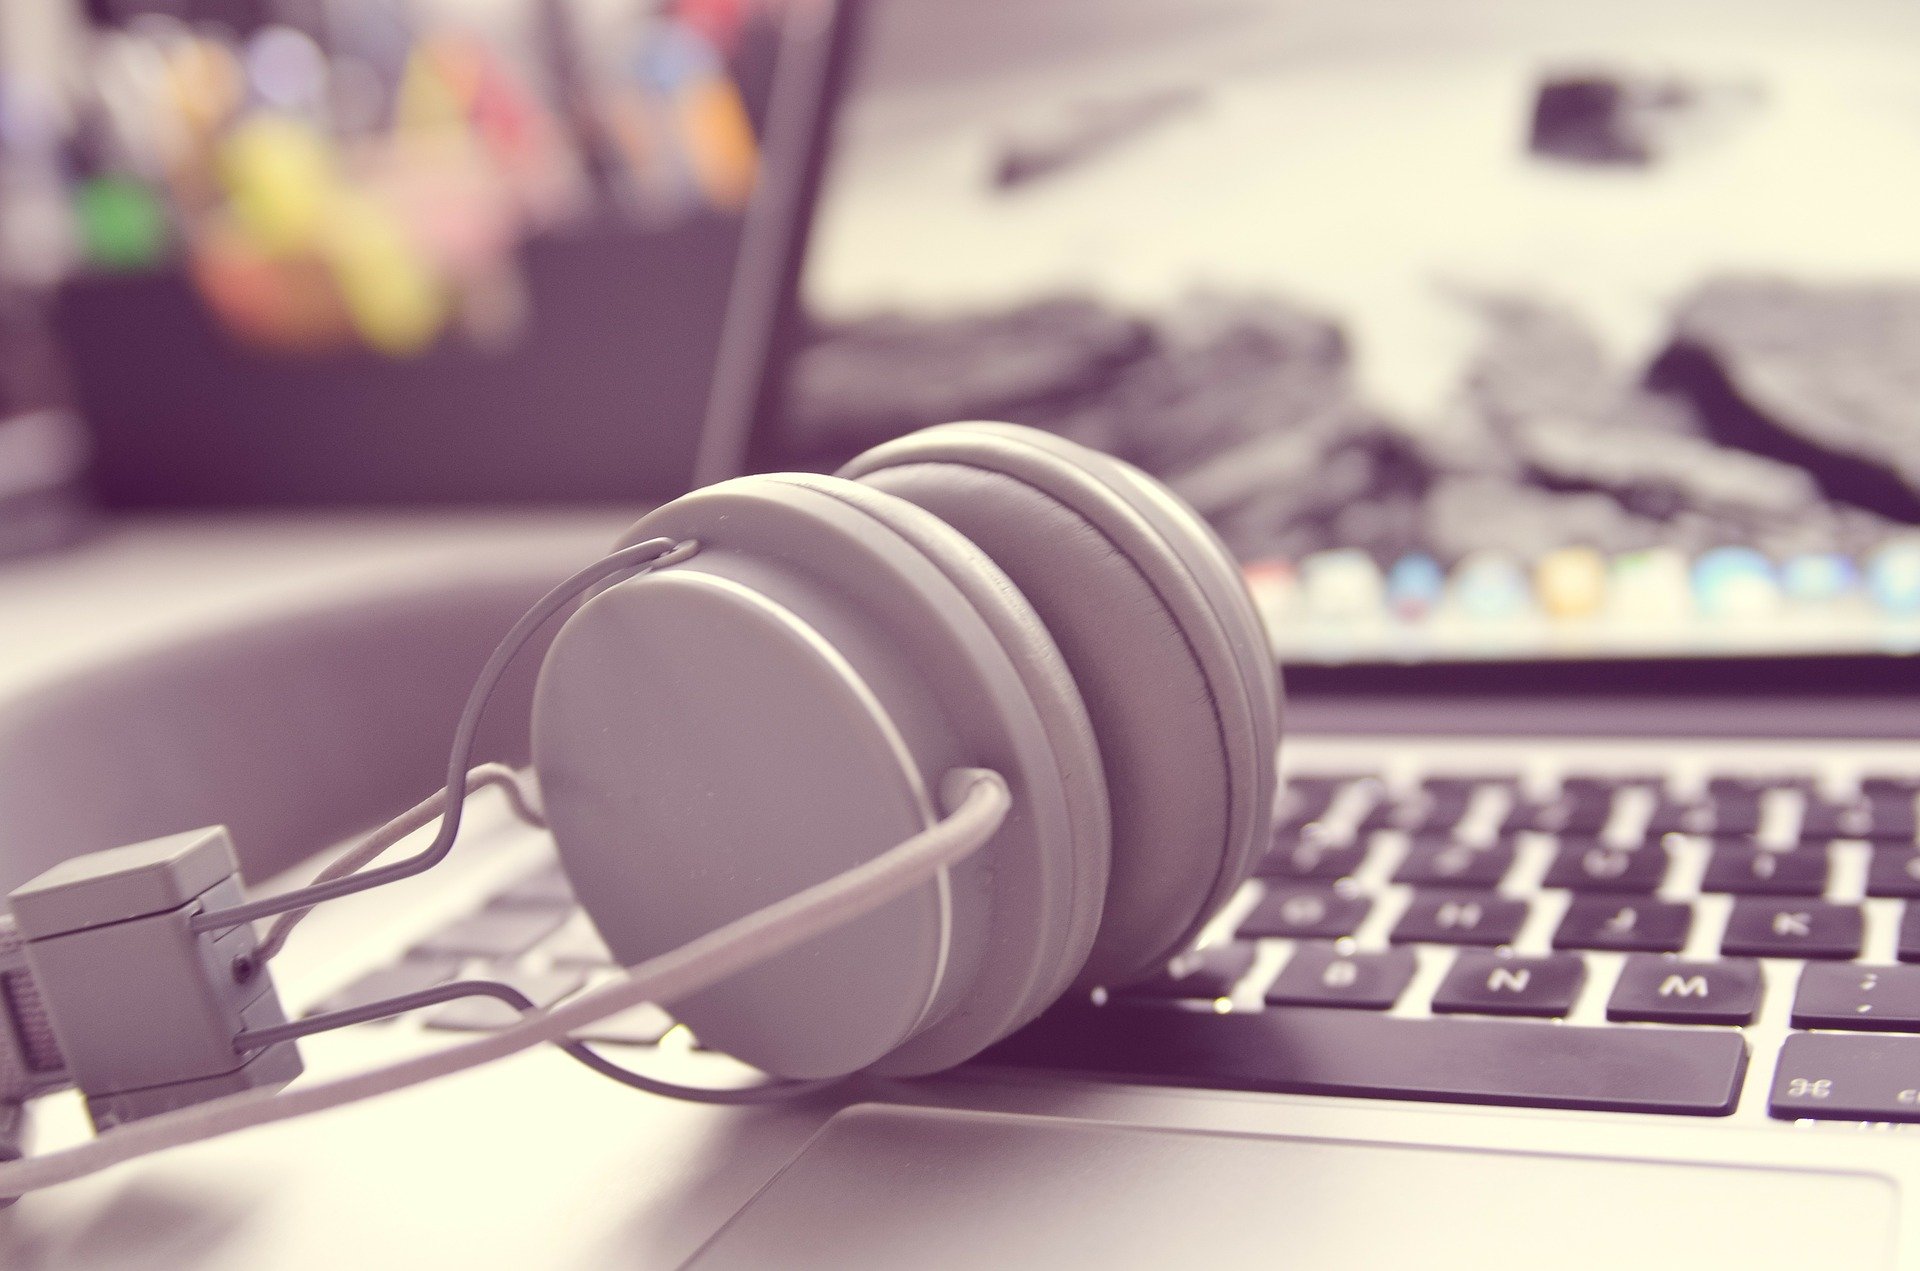 Image of a laptop and headphones